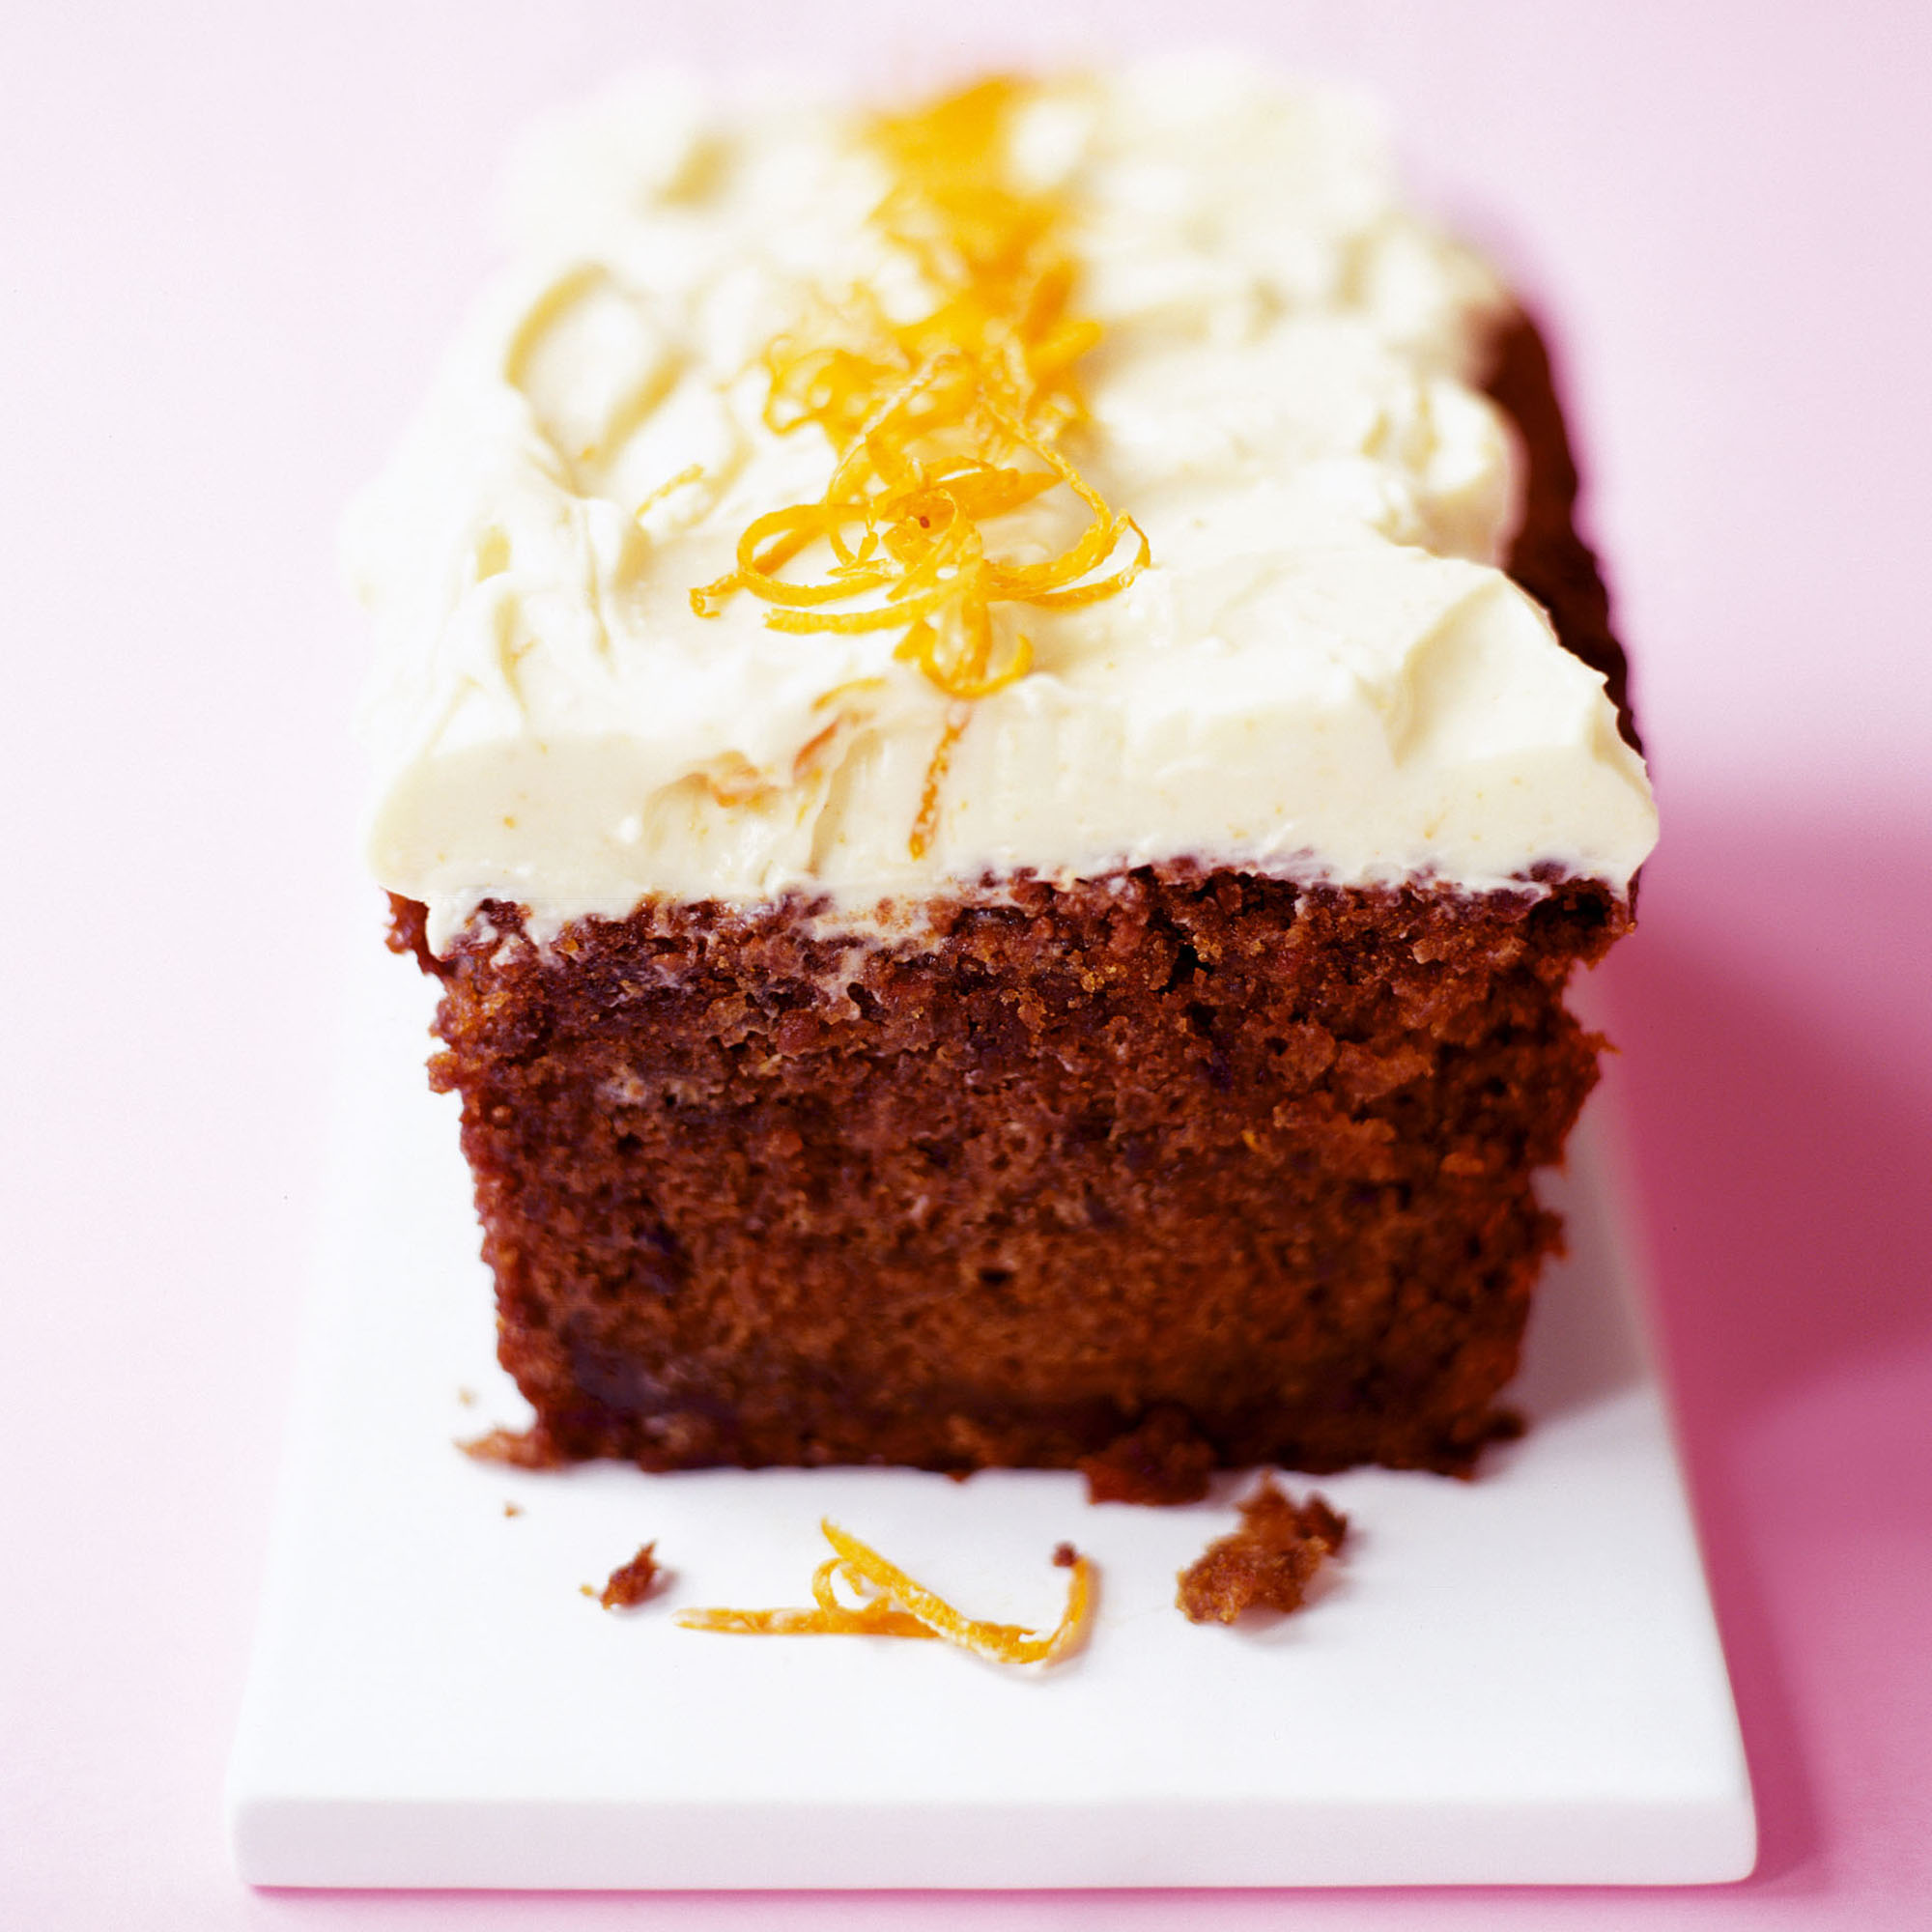 Healthy beetroot chocolate cake - The clever meal